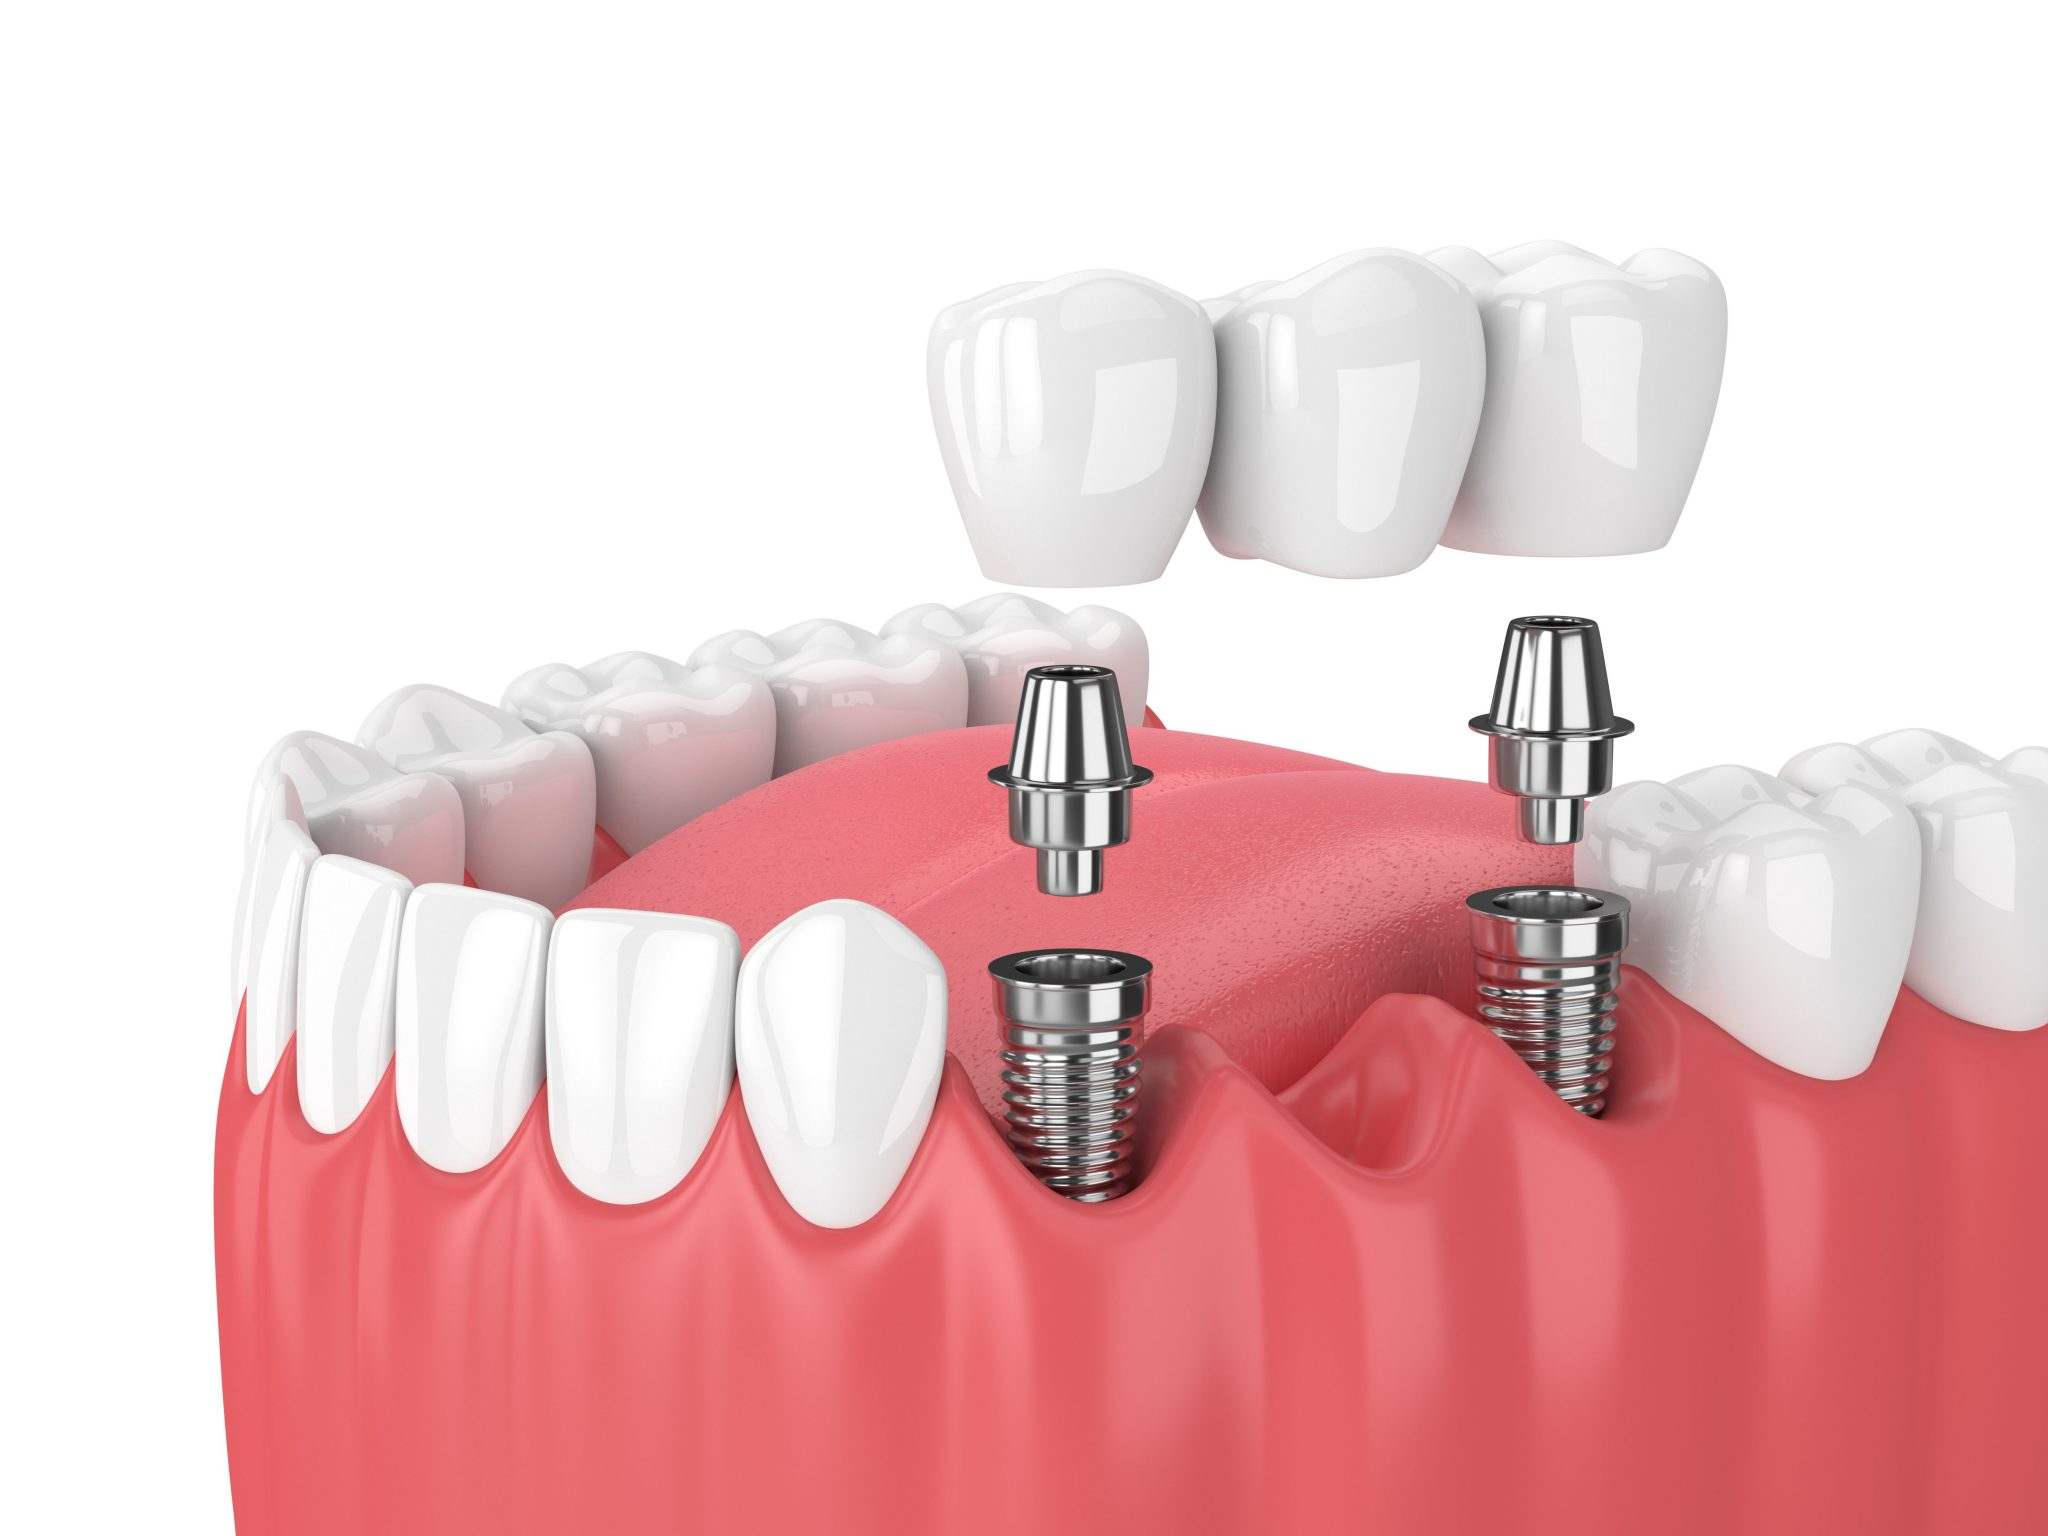 What are the complications of dental implants?